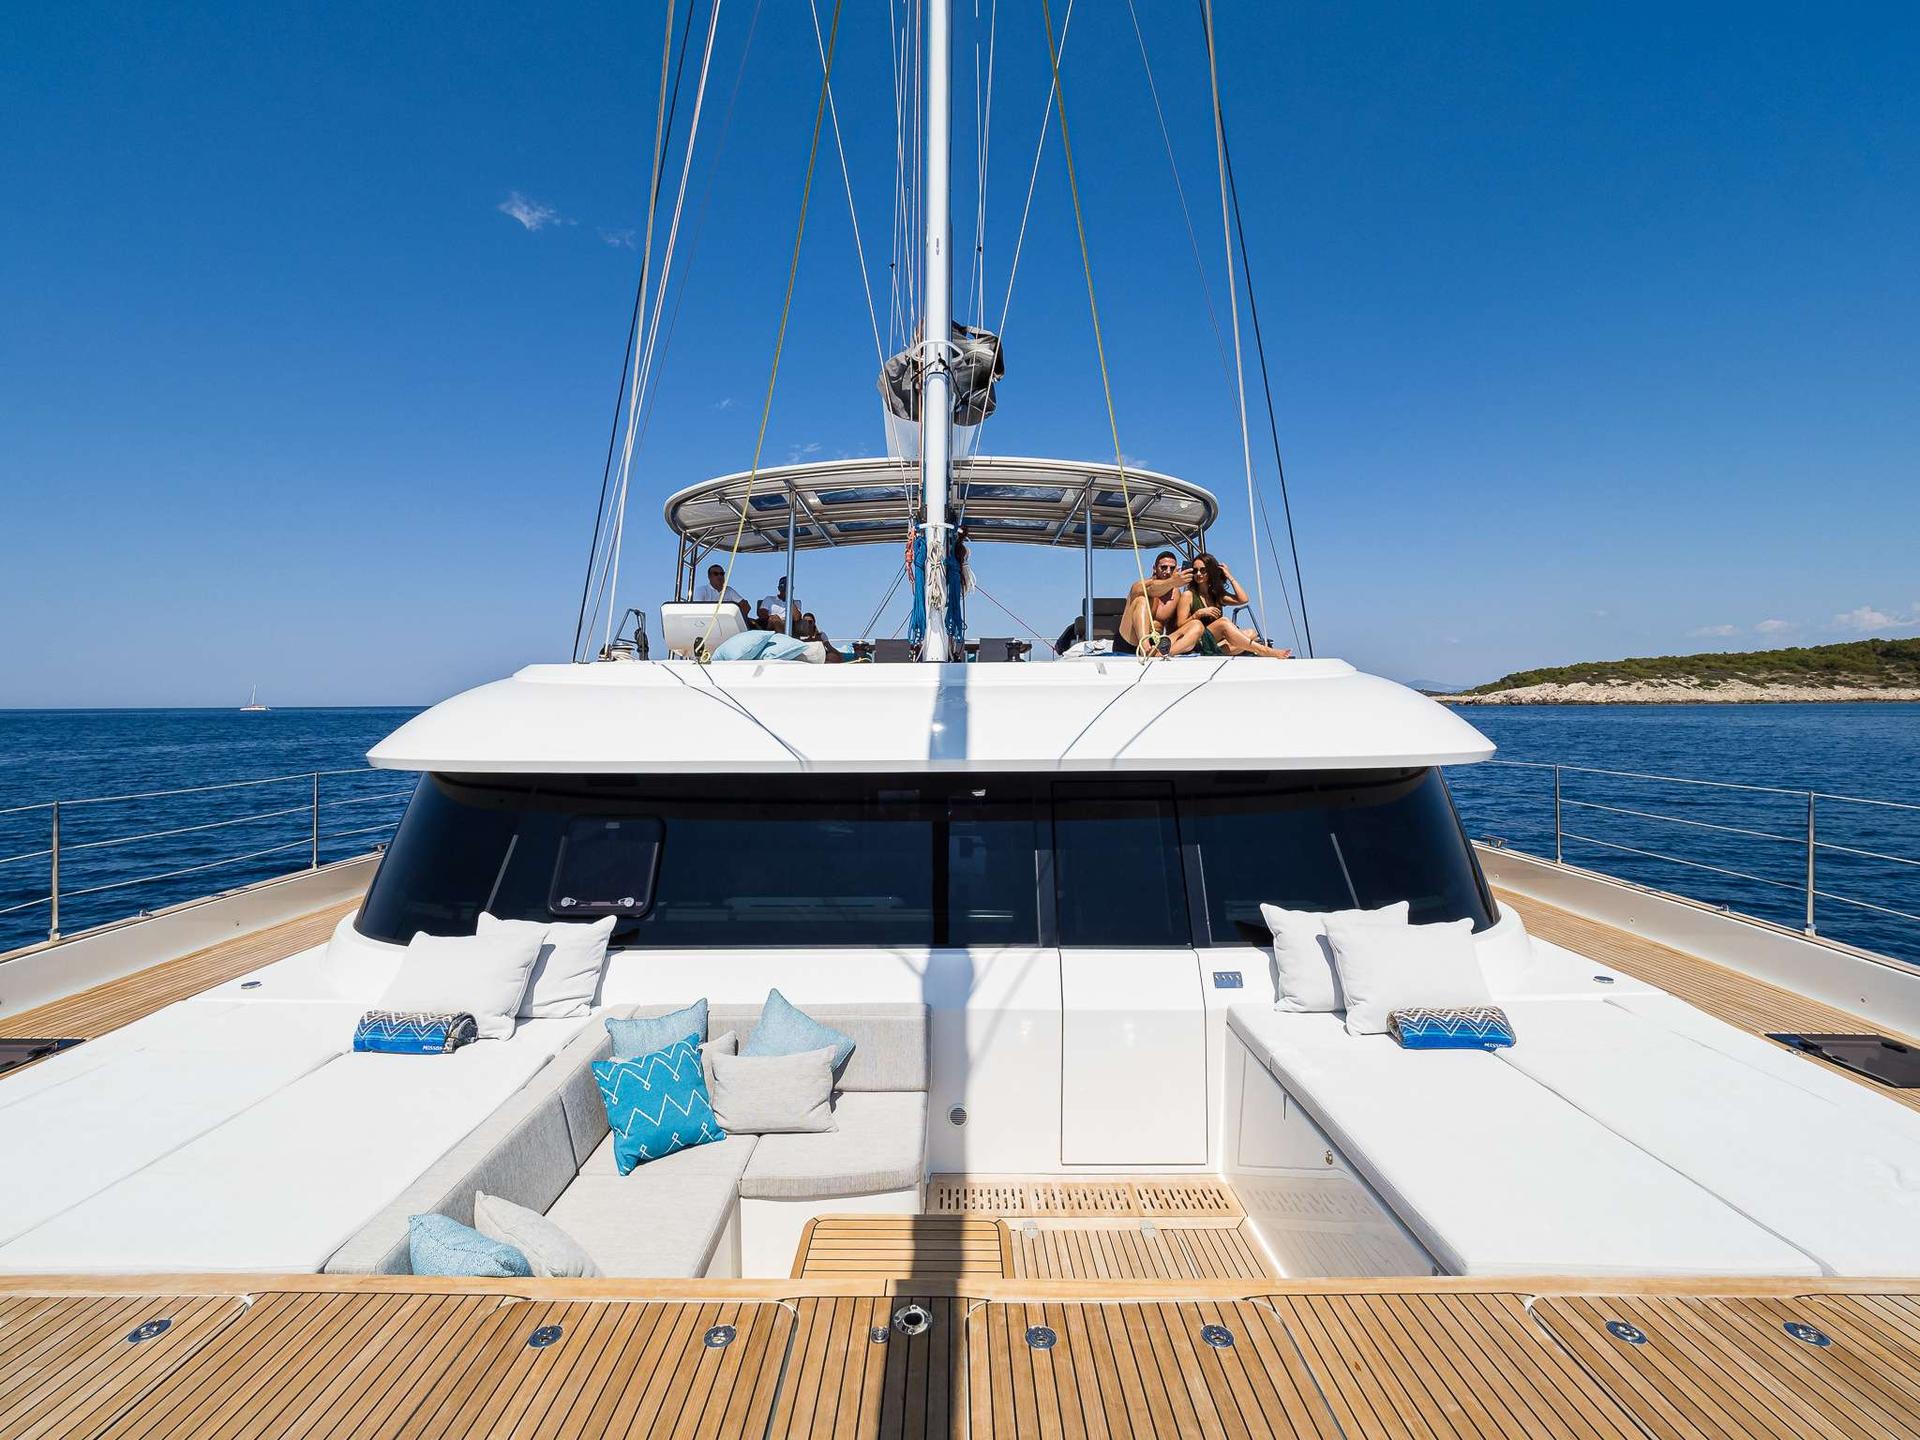 Vulpino is a beautifully designed, modern & High-Tech catamaran charter in Croatia with great deck space & excellent crew - high Point Yachting